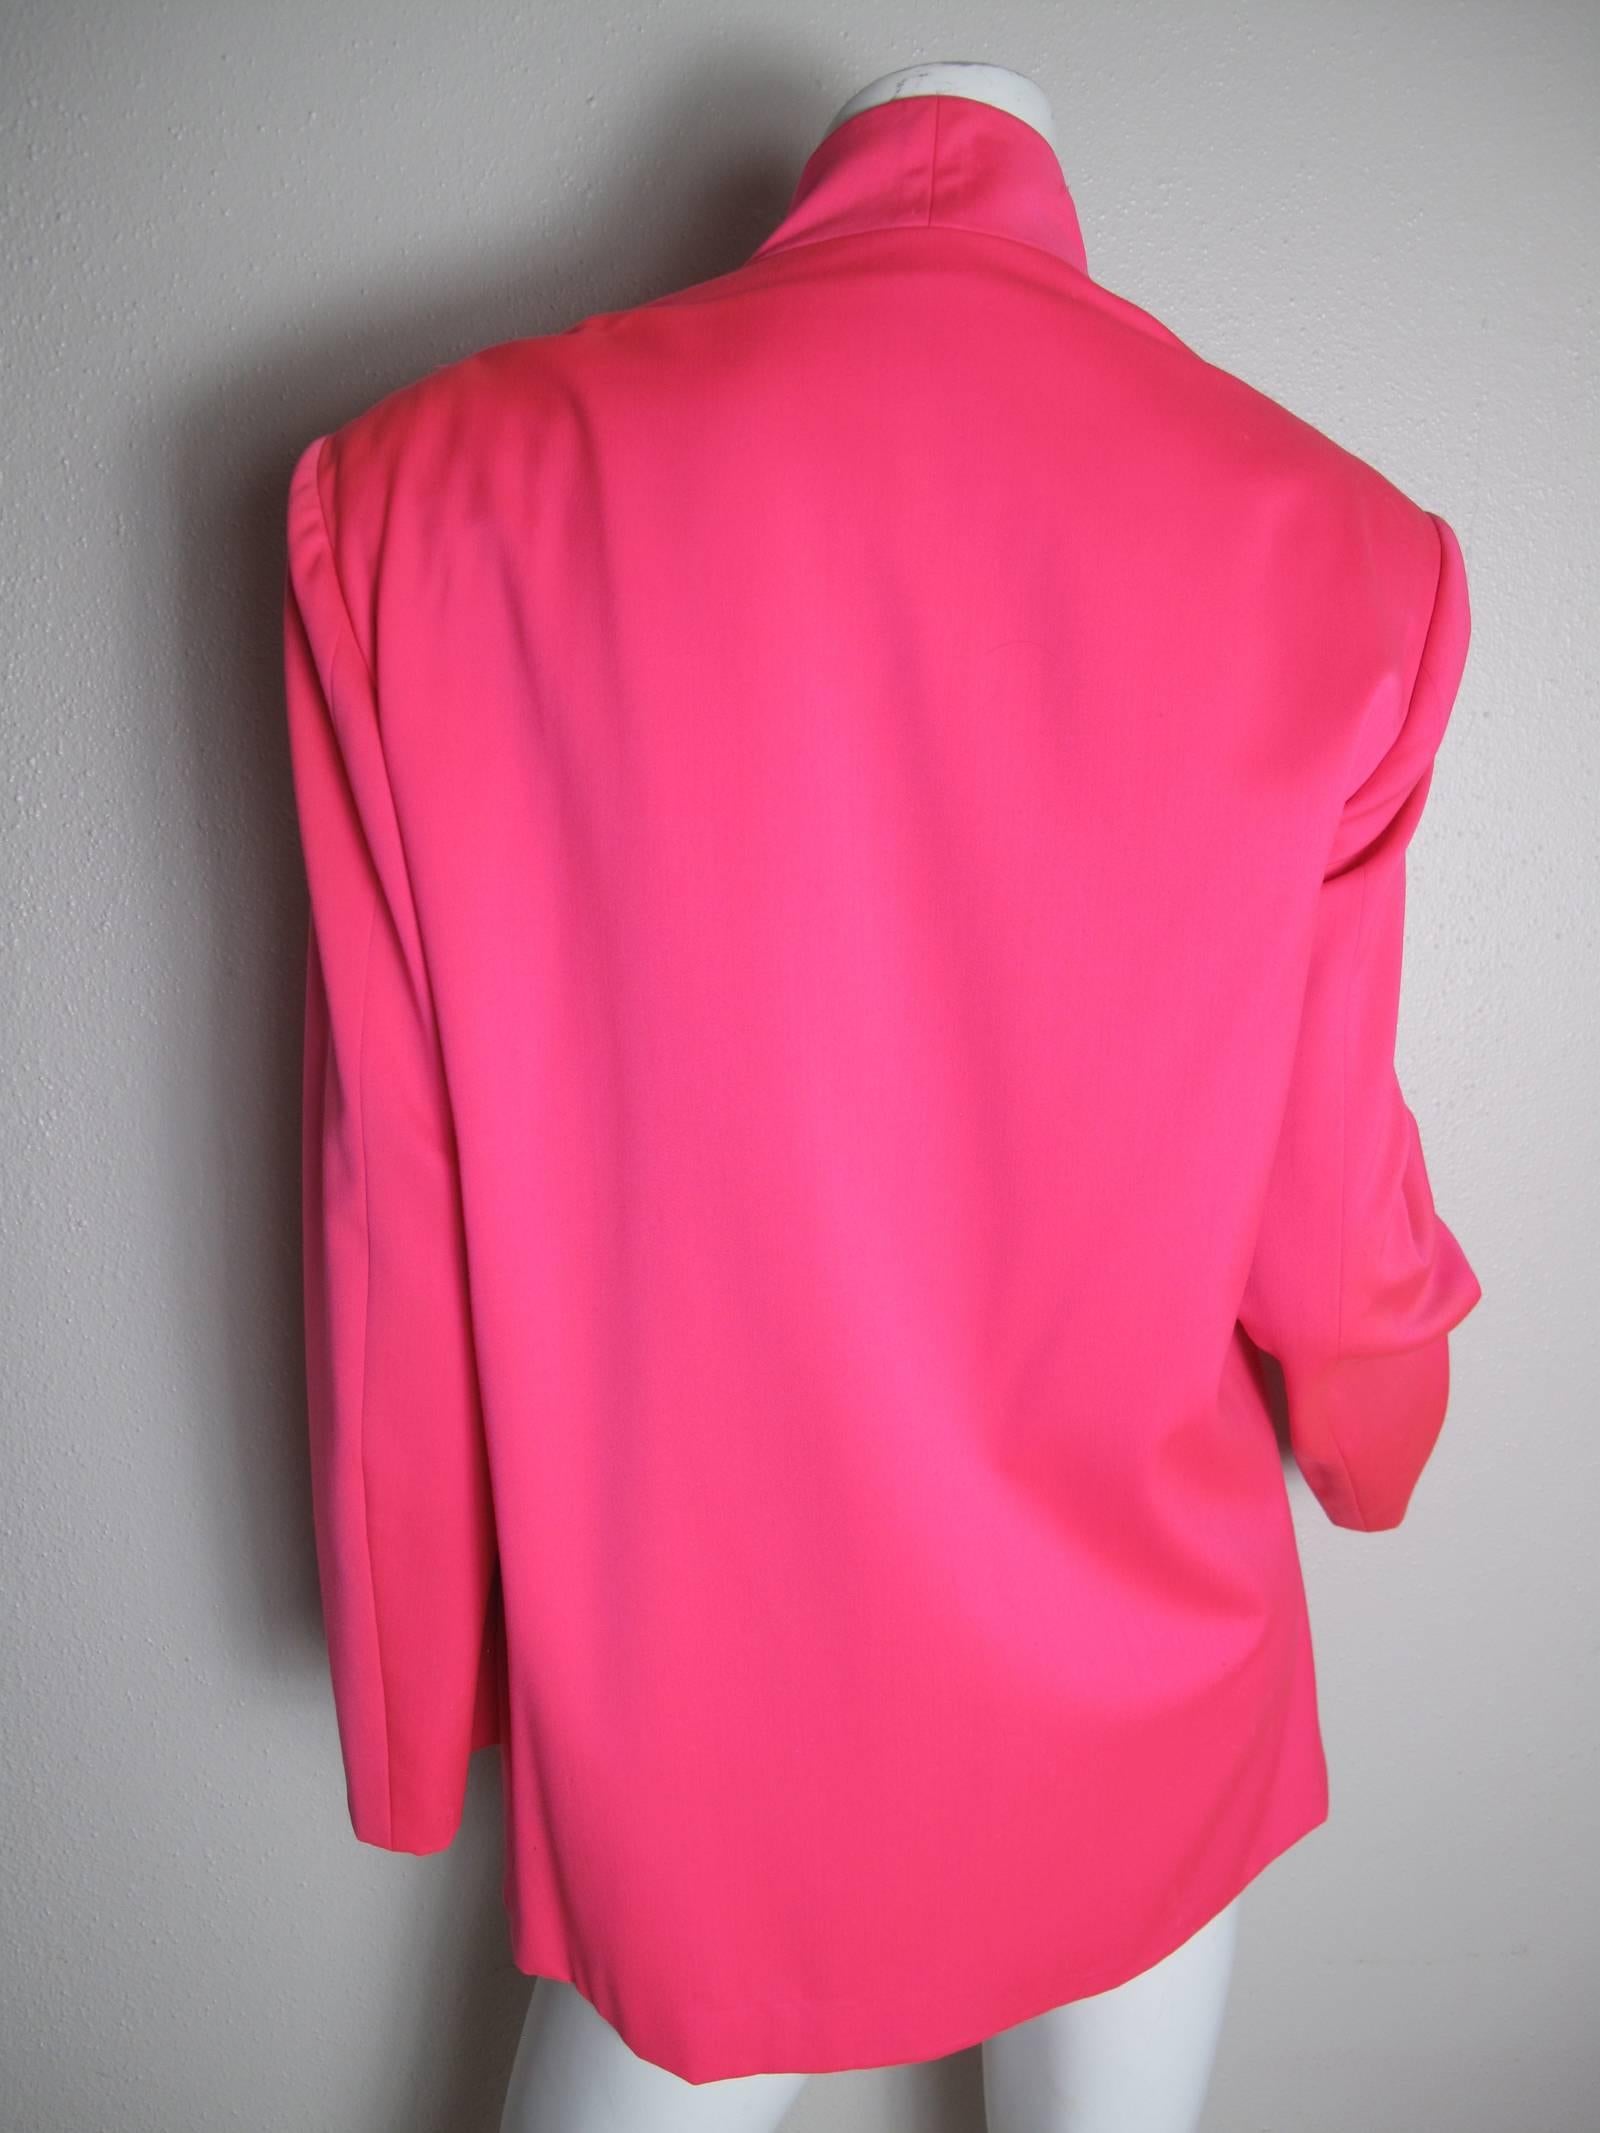 Pink 1984 Stephen Sprouse Suit